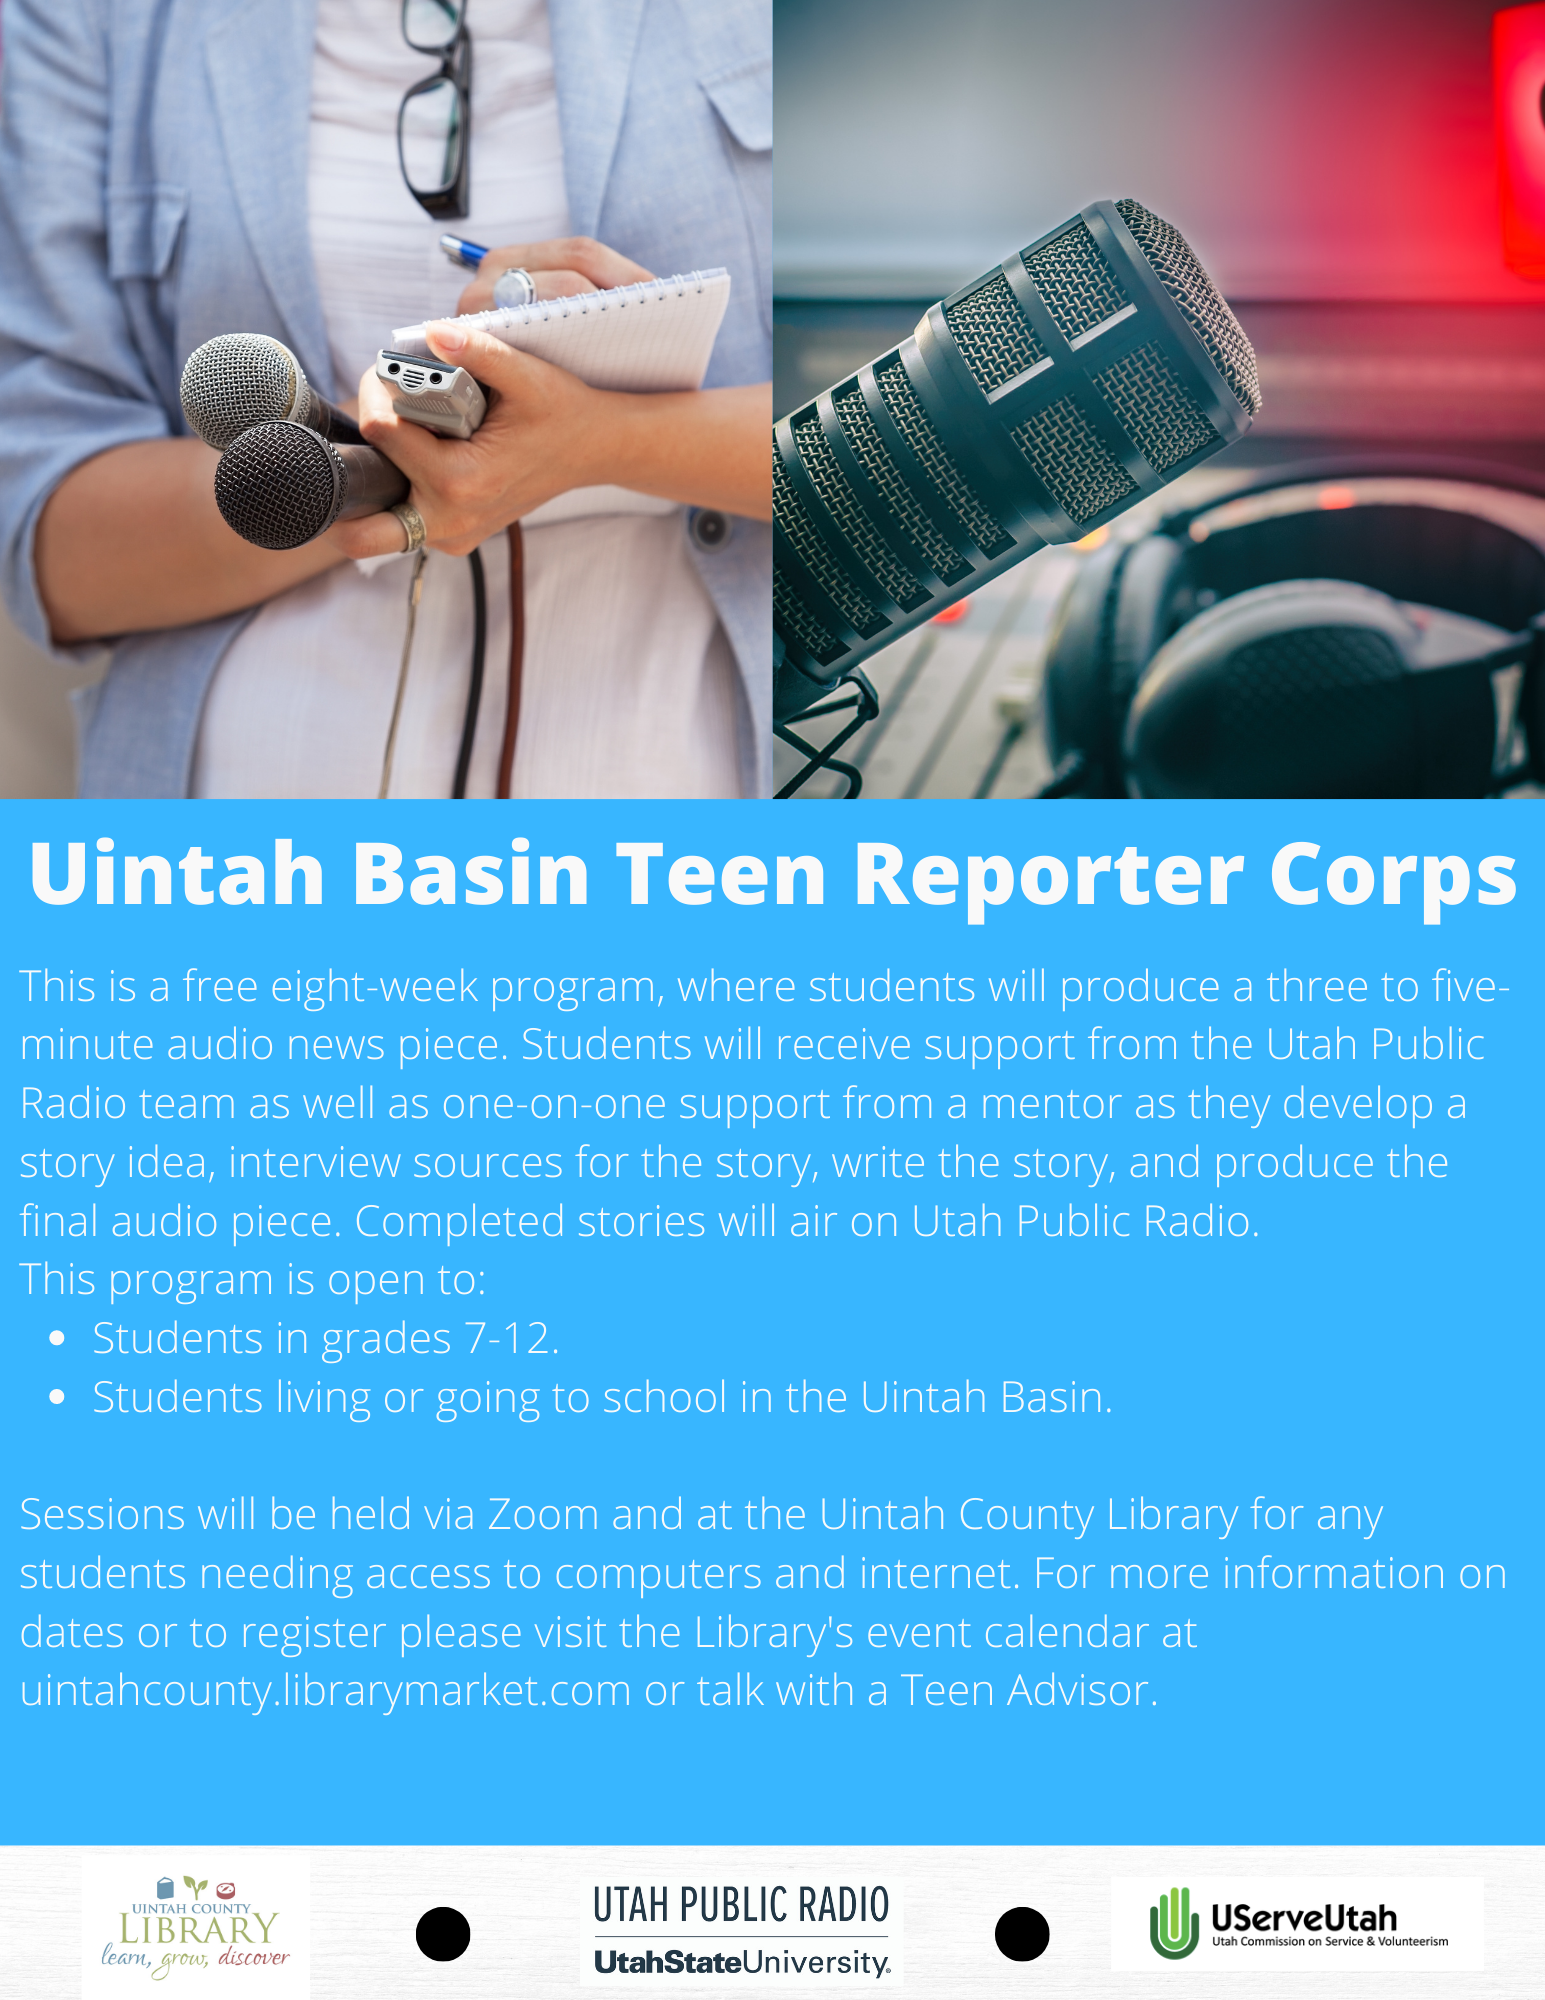 Blue background with Uintah Basin Teen Reporter Corps in white. Information text in white as well. Same information as in the description. 